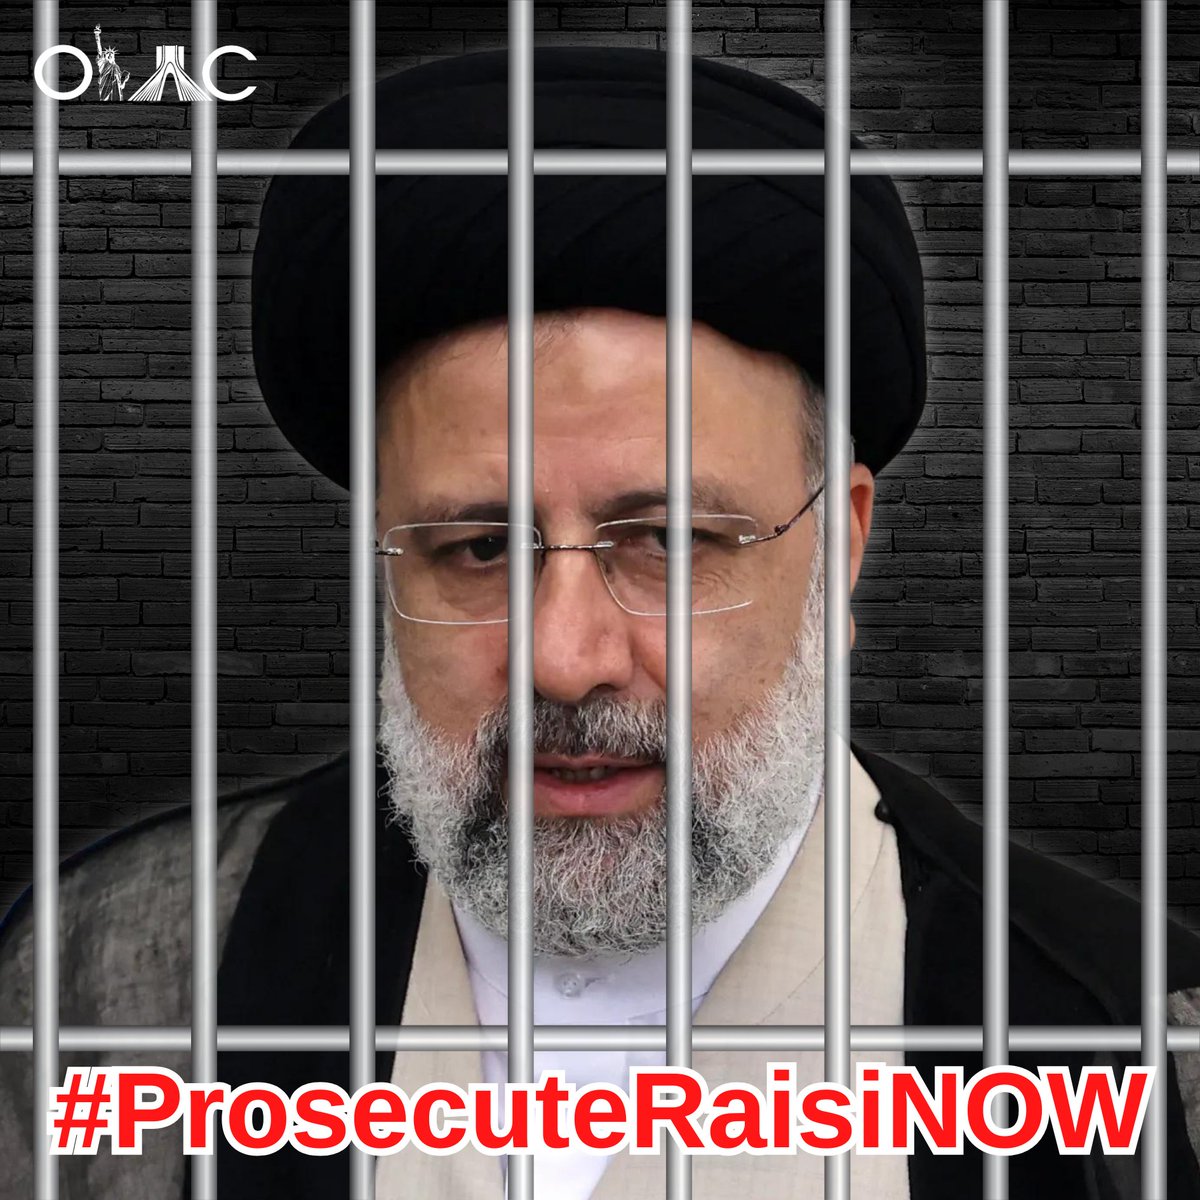 Raisi does not deserve to be at the U.N., he deserves to be in JAIL! #ProsecuteRaisiNOW #RaisiMassMurderer